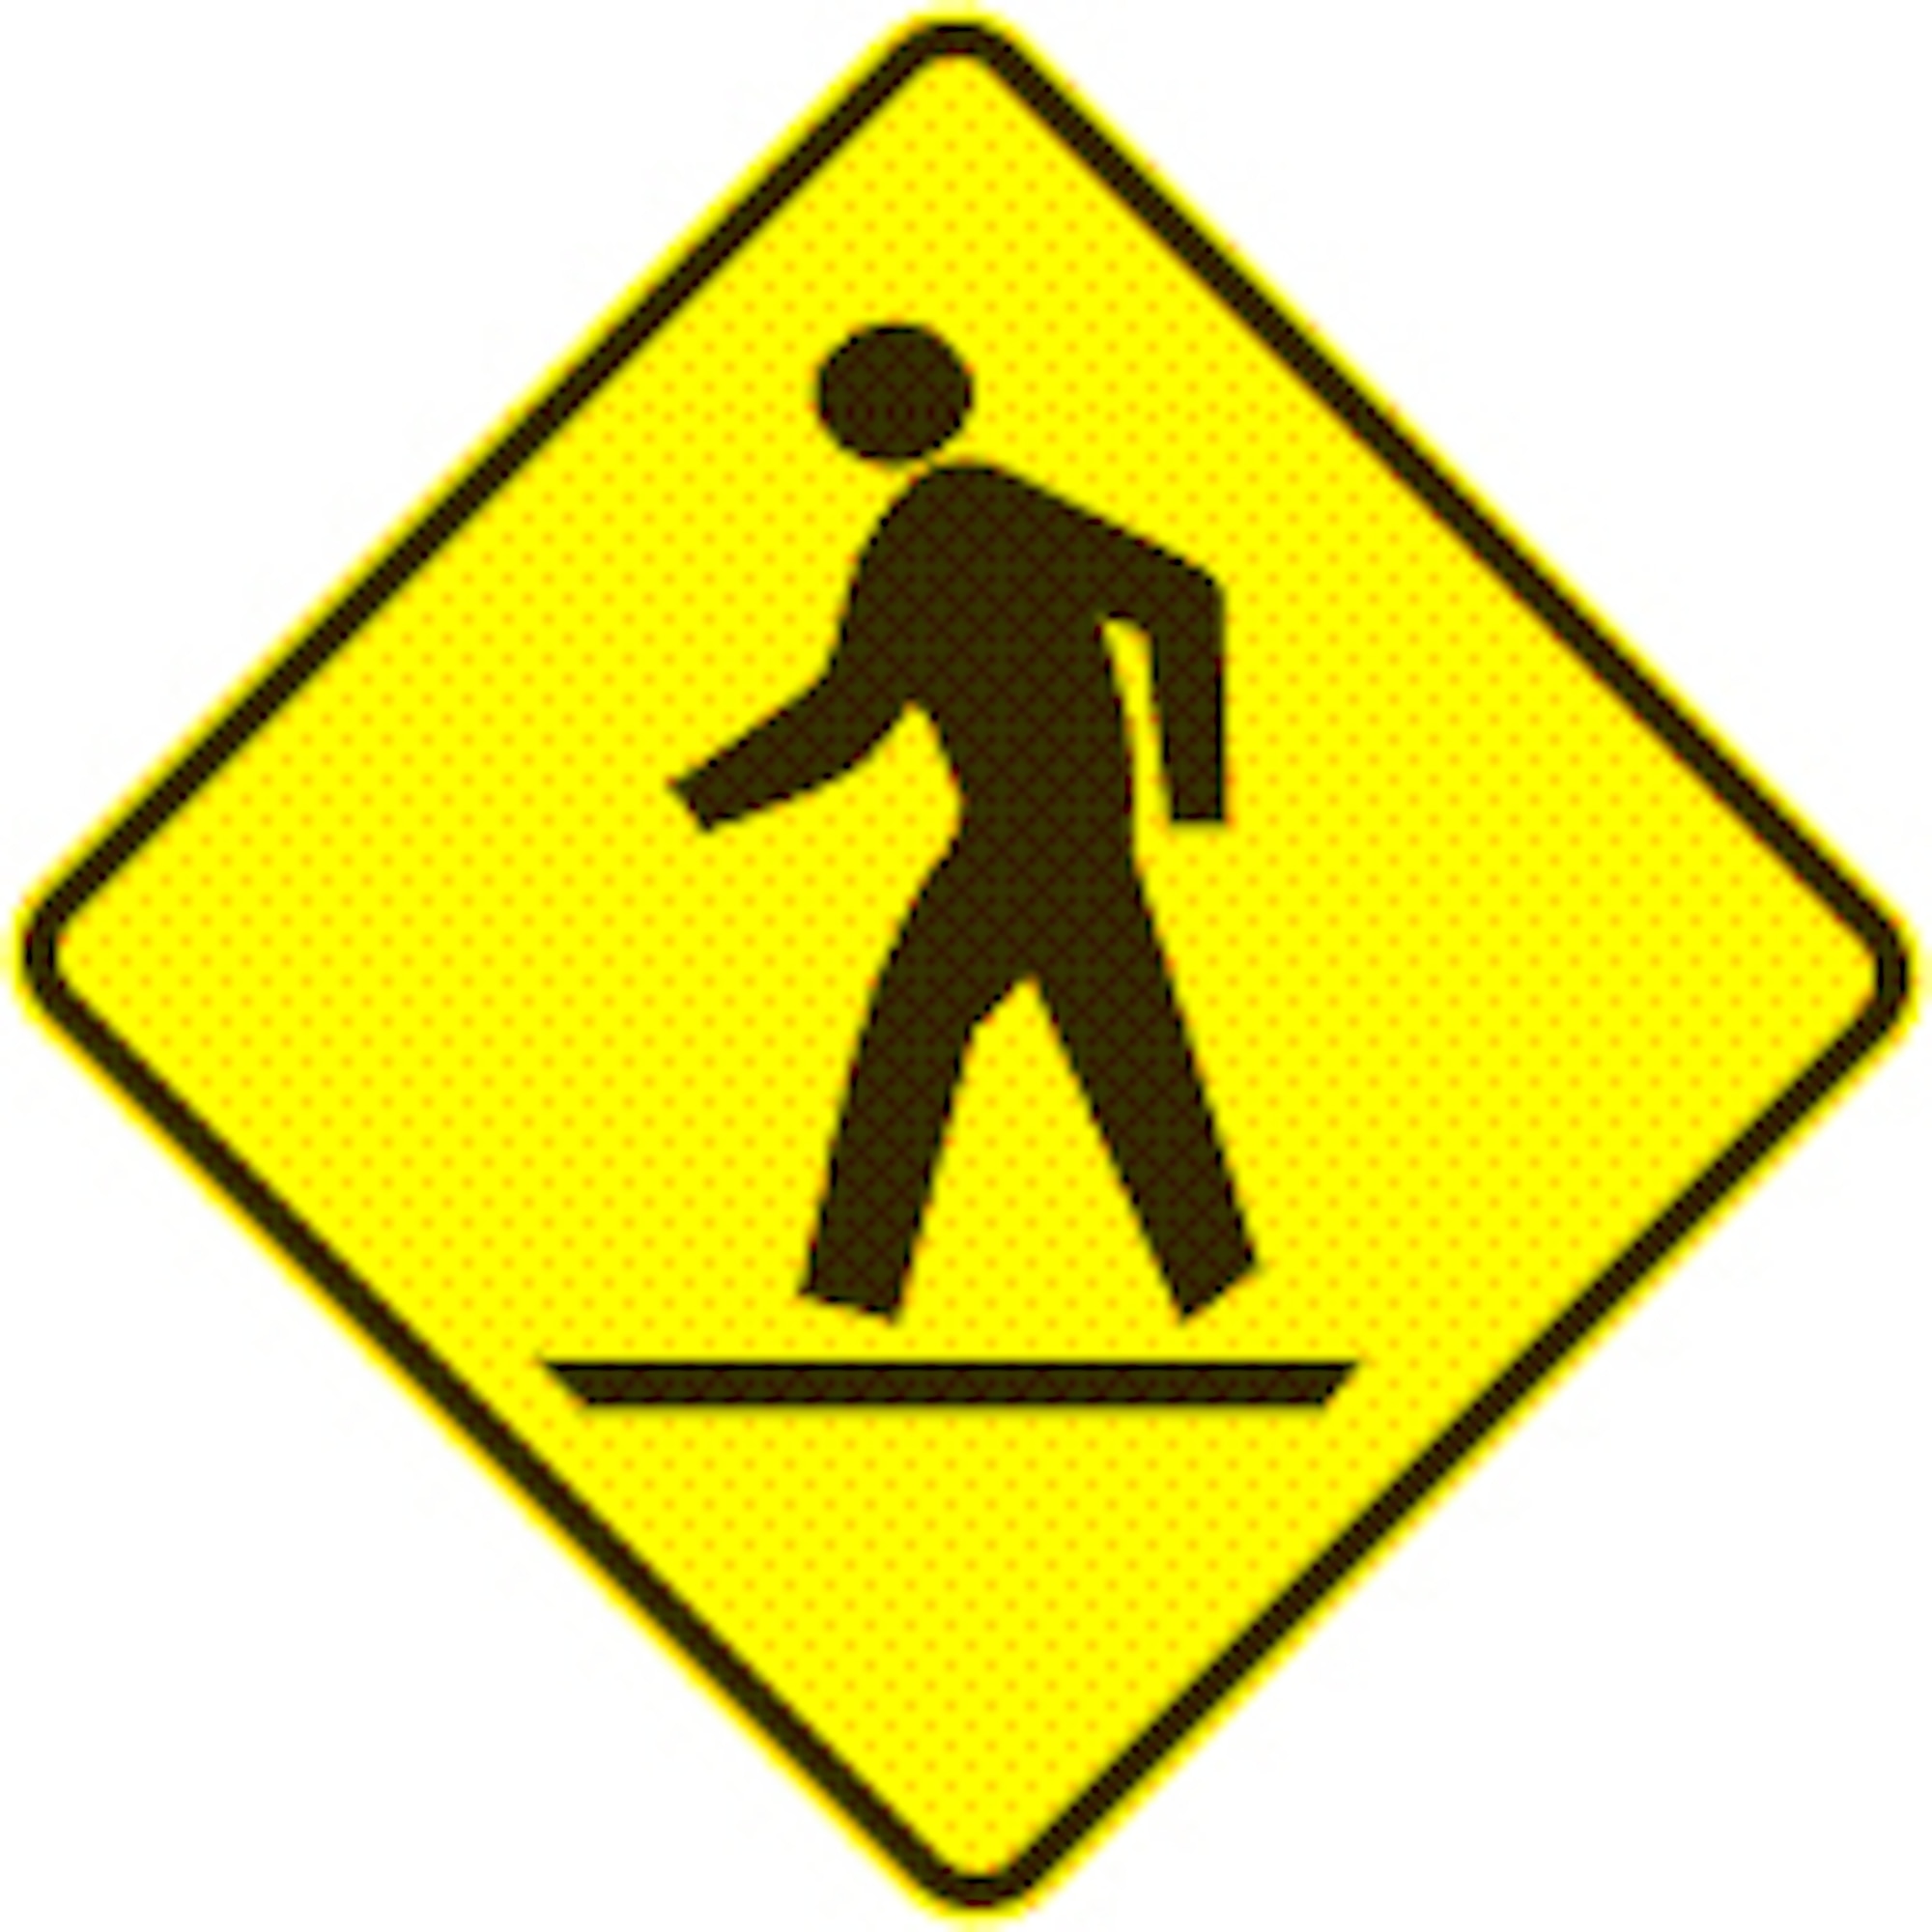 Most state laws (including Maryland and Virginia) require pedestrians not using a crosswalk to yield the right of way to vehicles. The warning is also very clearly stated in Air Force Joint Manual 24-306, Chapter 7 (Manual for the Wheeled Vehicle Driver), “When you cross a street, cross at an intersection or crosswalk if one is available.” 